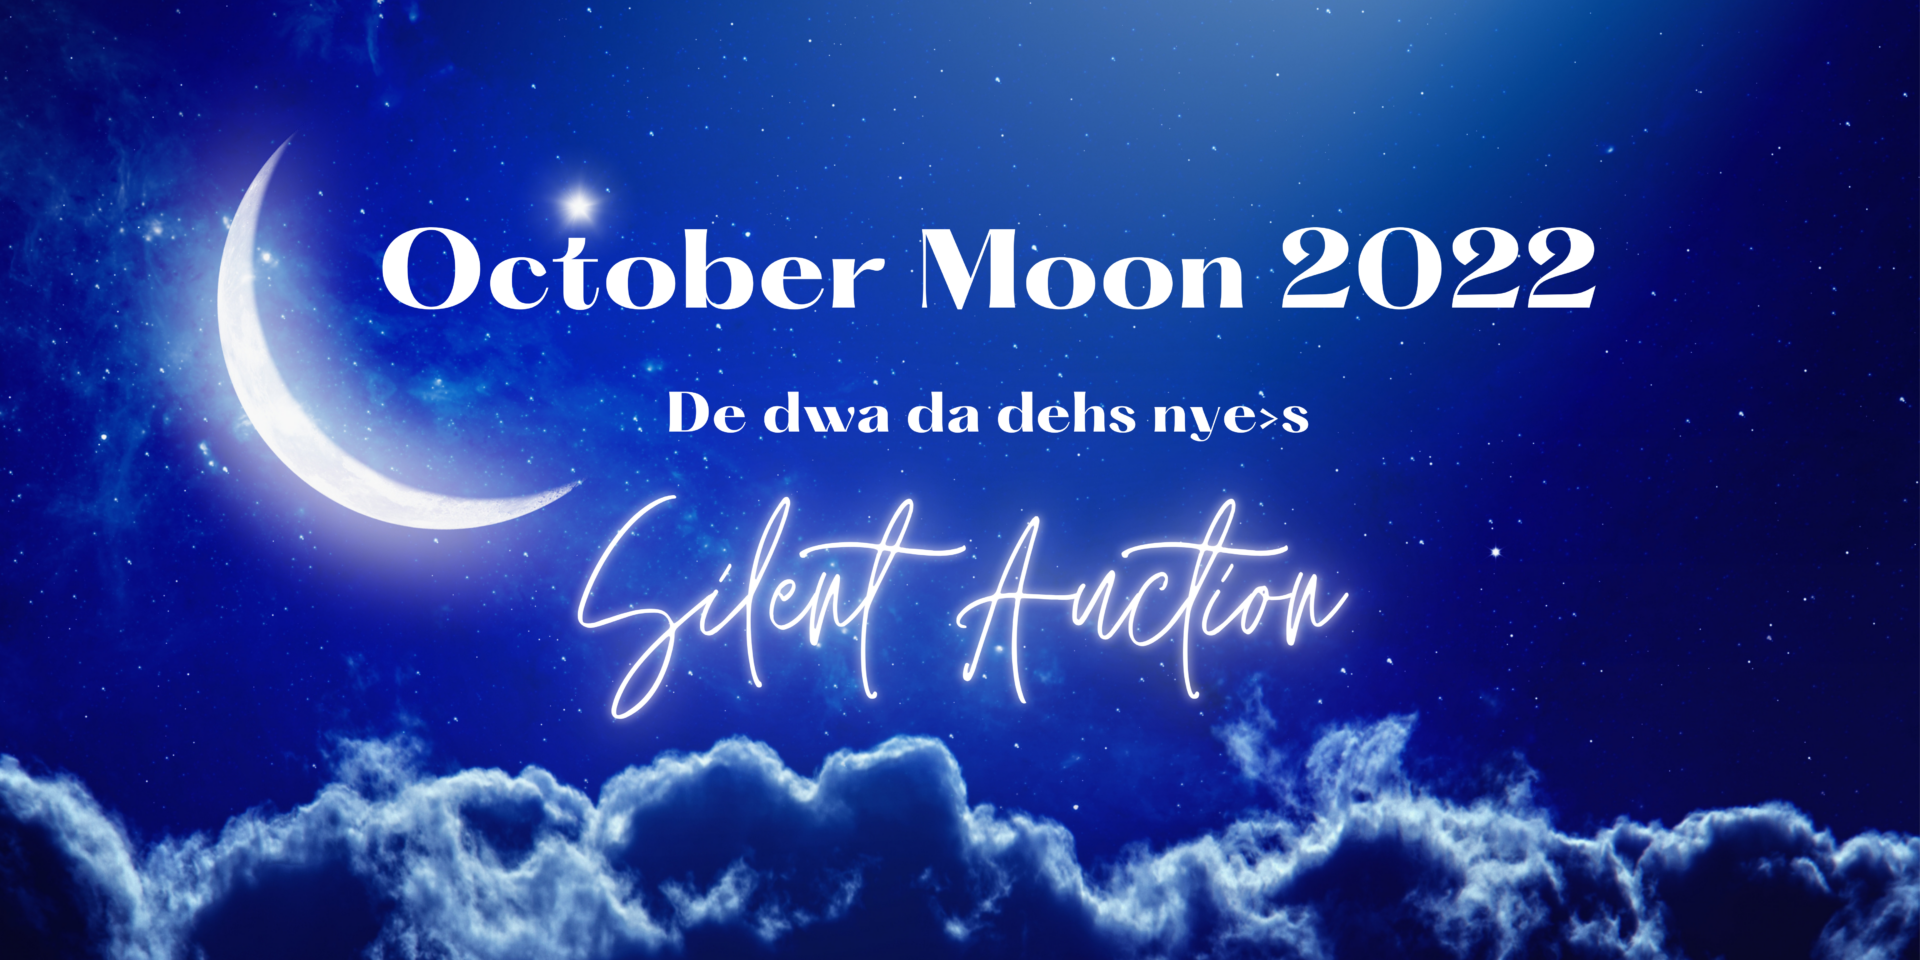 October Moon Online Silent Auction